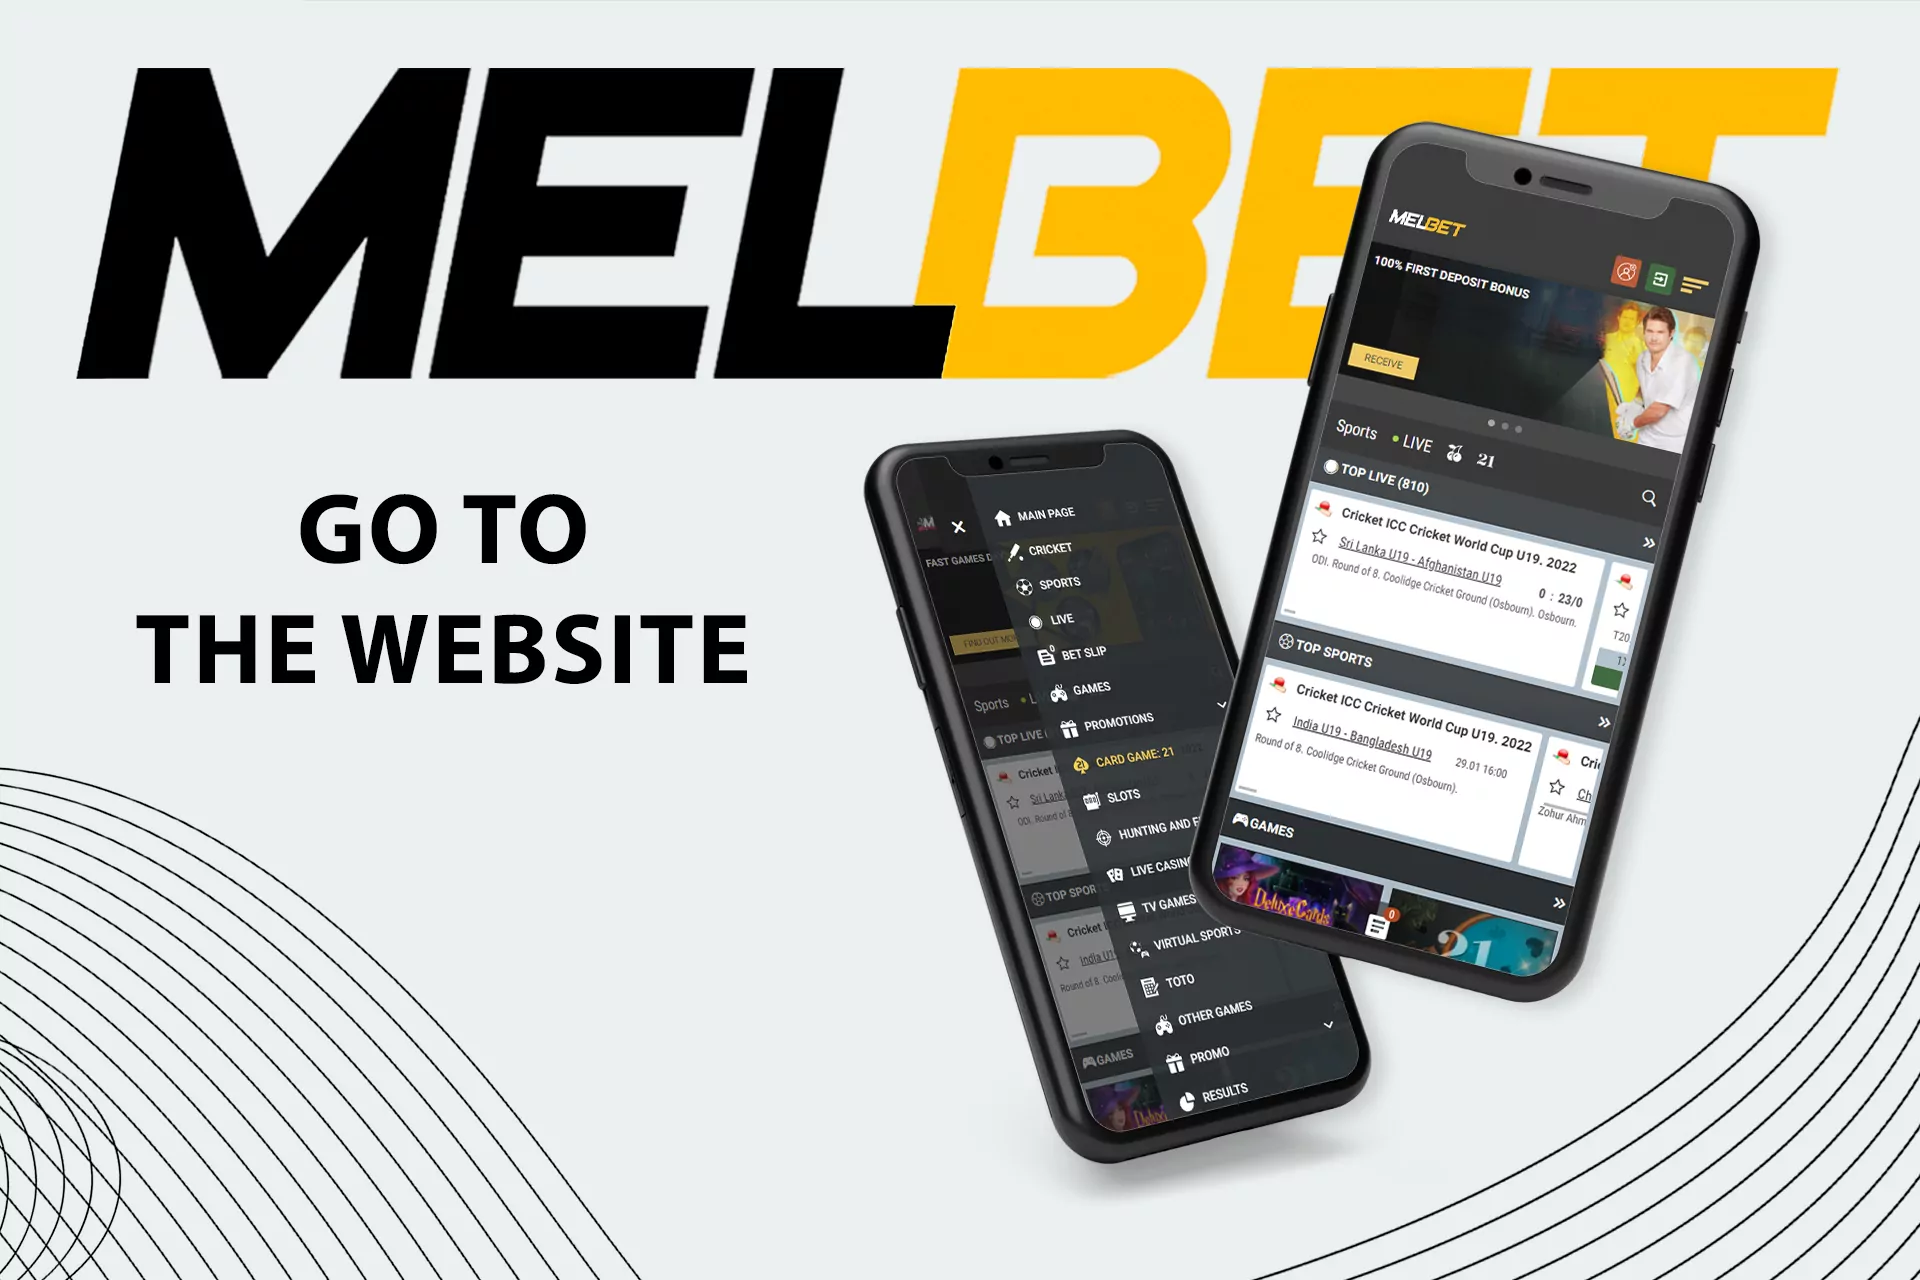 Open the Melbet site in a browser.